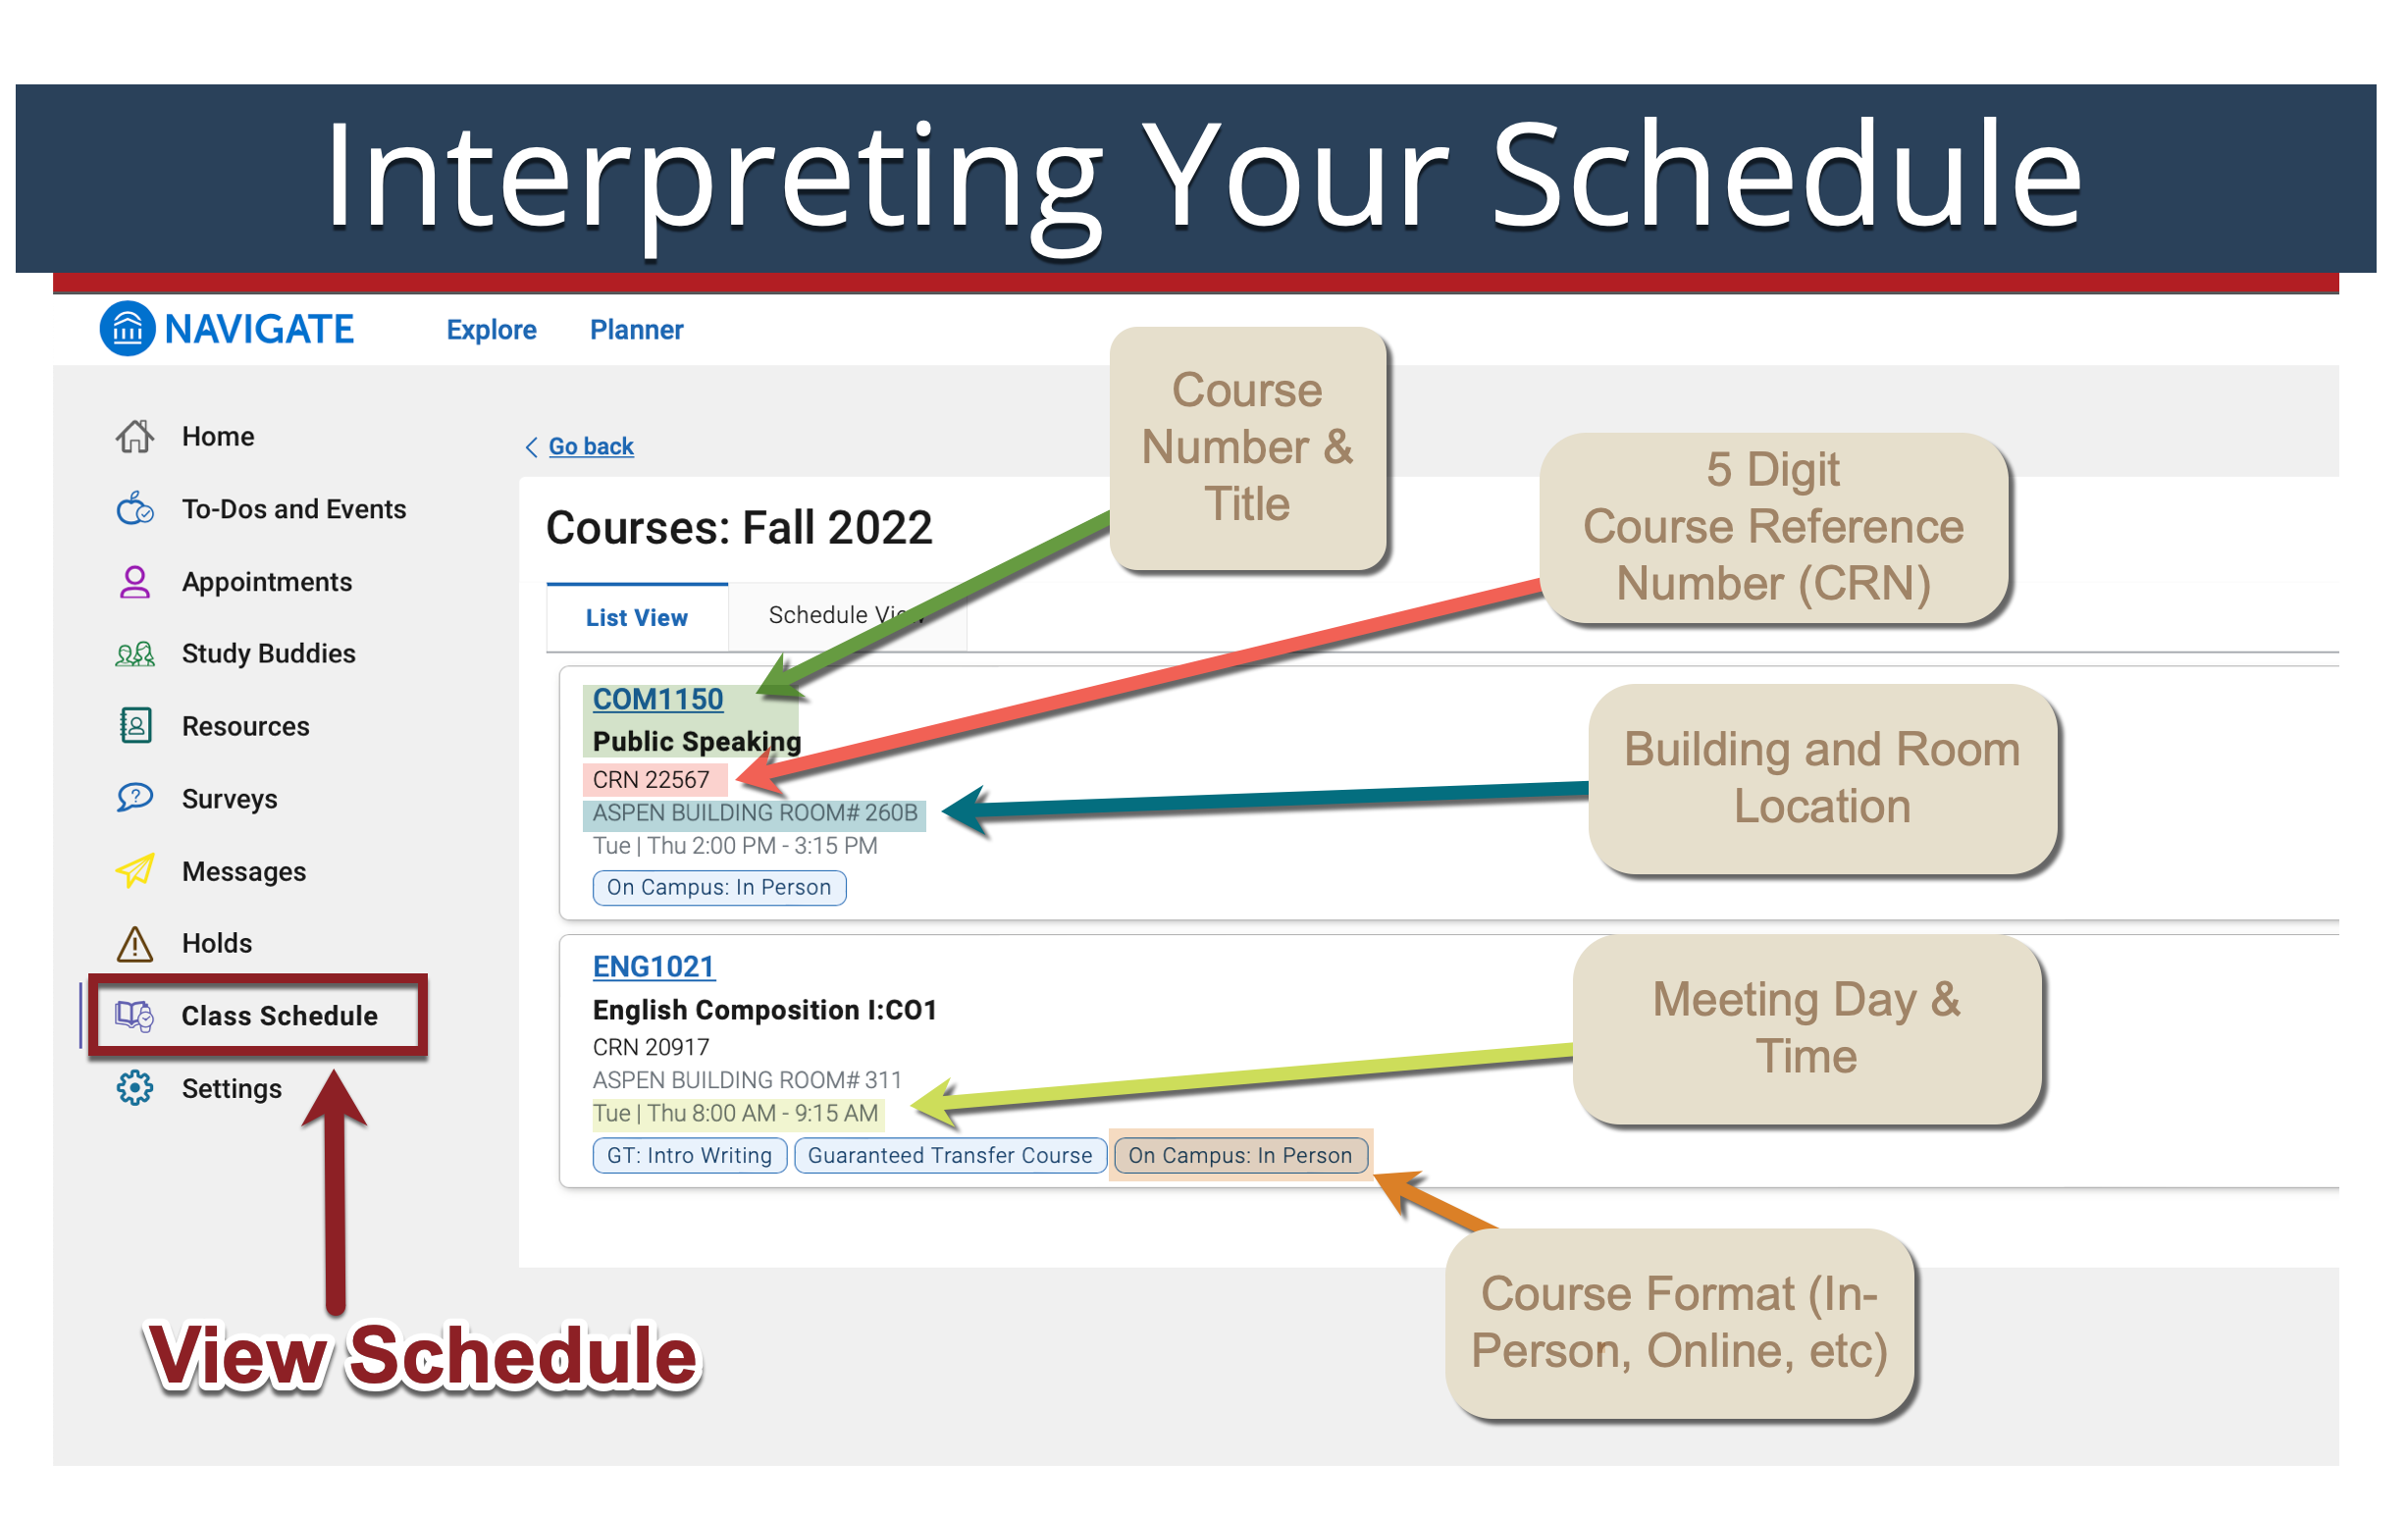 Image with Course Schedule Annotations